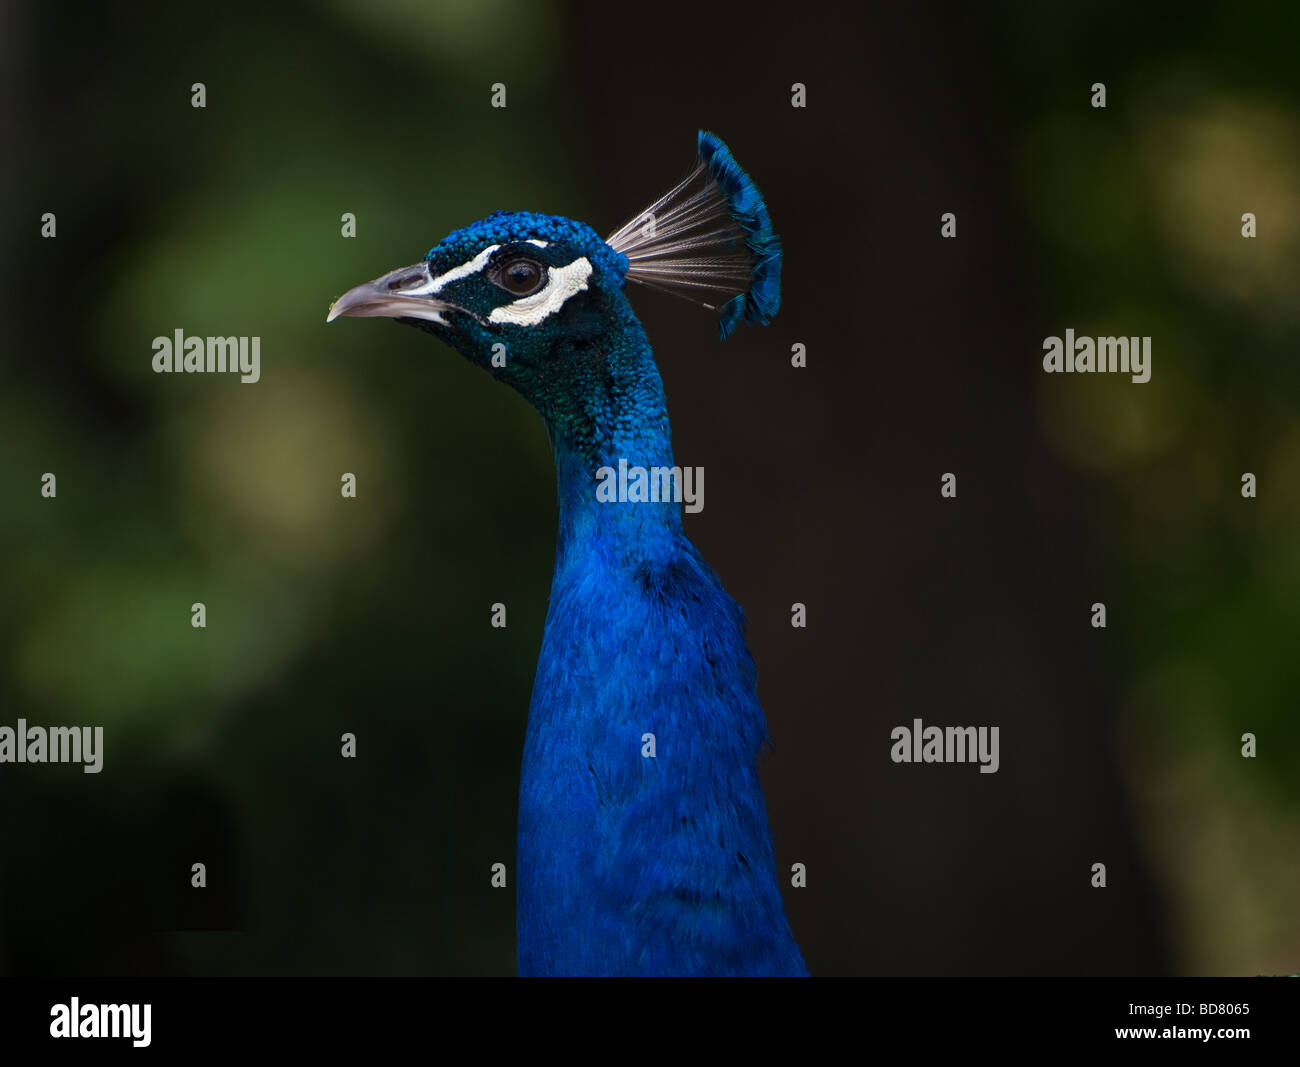 This beautiful and colorful peacock was spotted in Beacon Hill Park during  a trip to Victoria, British Columbia, Canada Stock Photo - Alamy